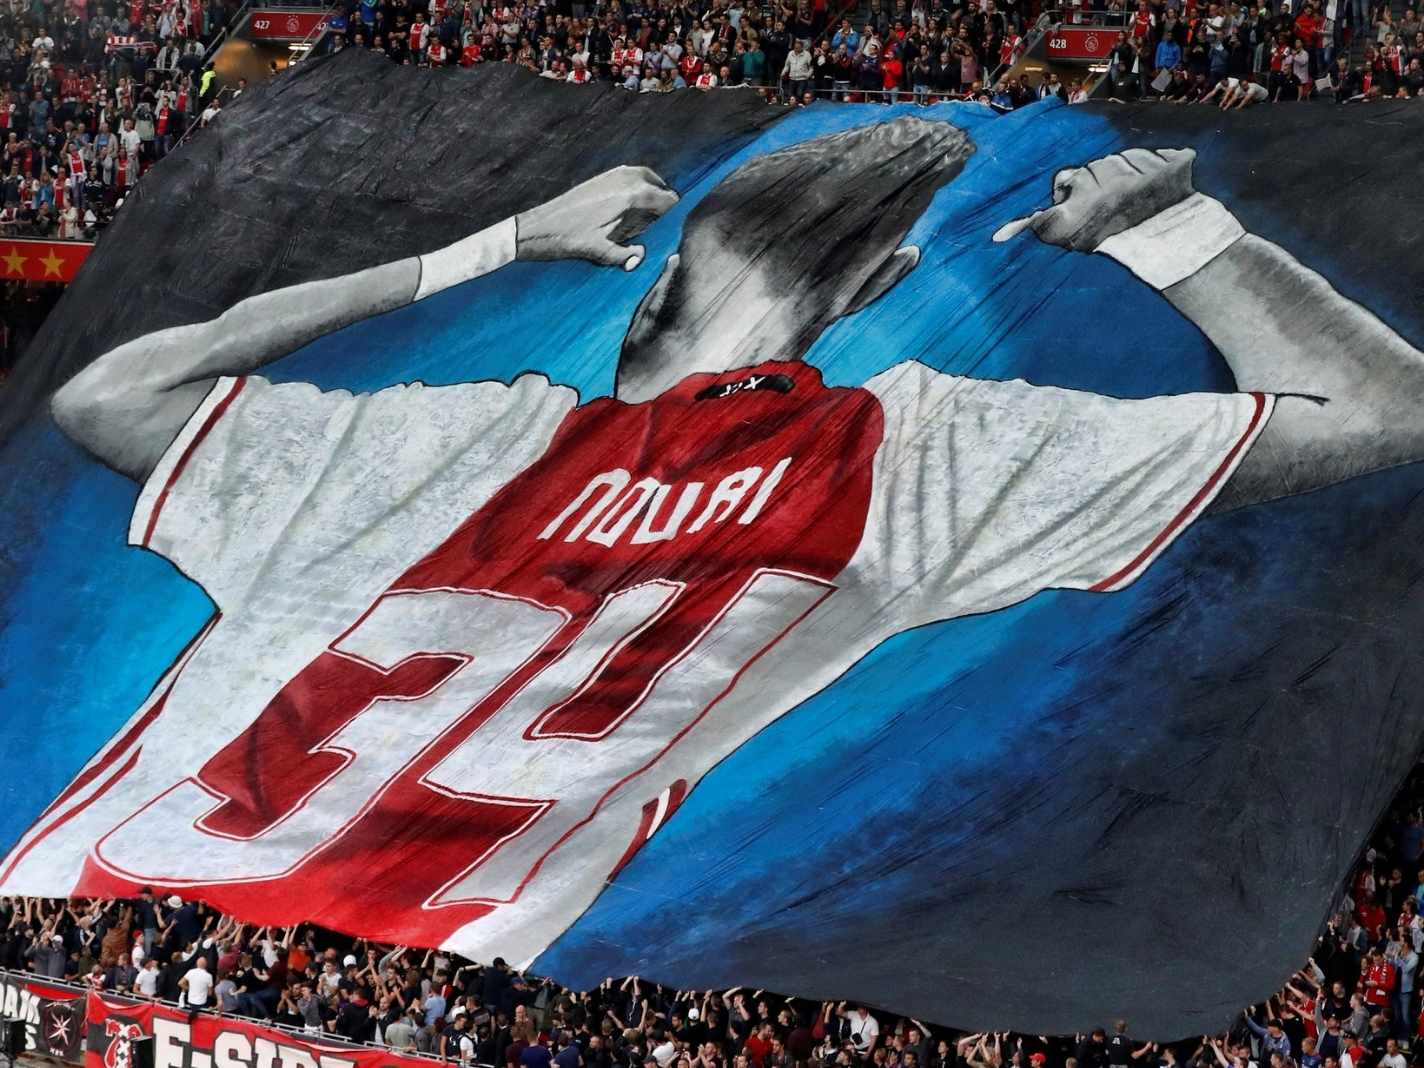 Ajax announce payout and retire number 34 jersey in honour of Abdelhak Nouri